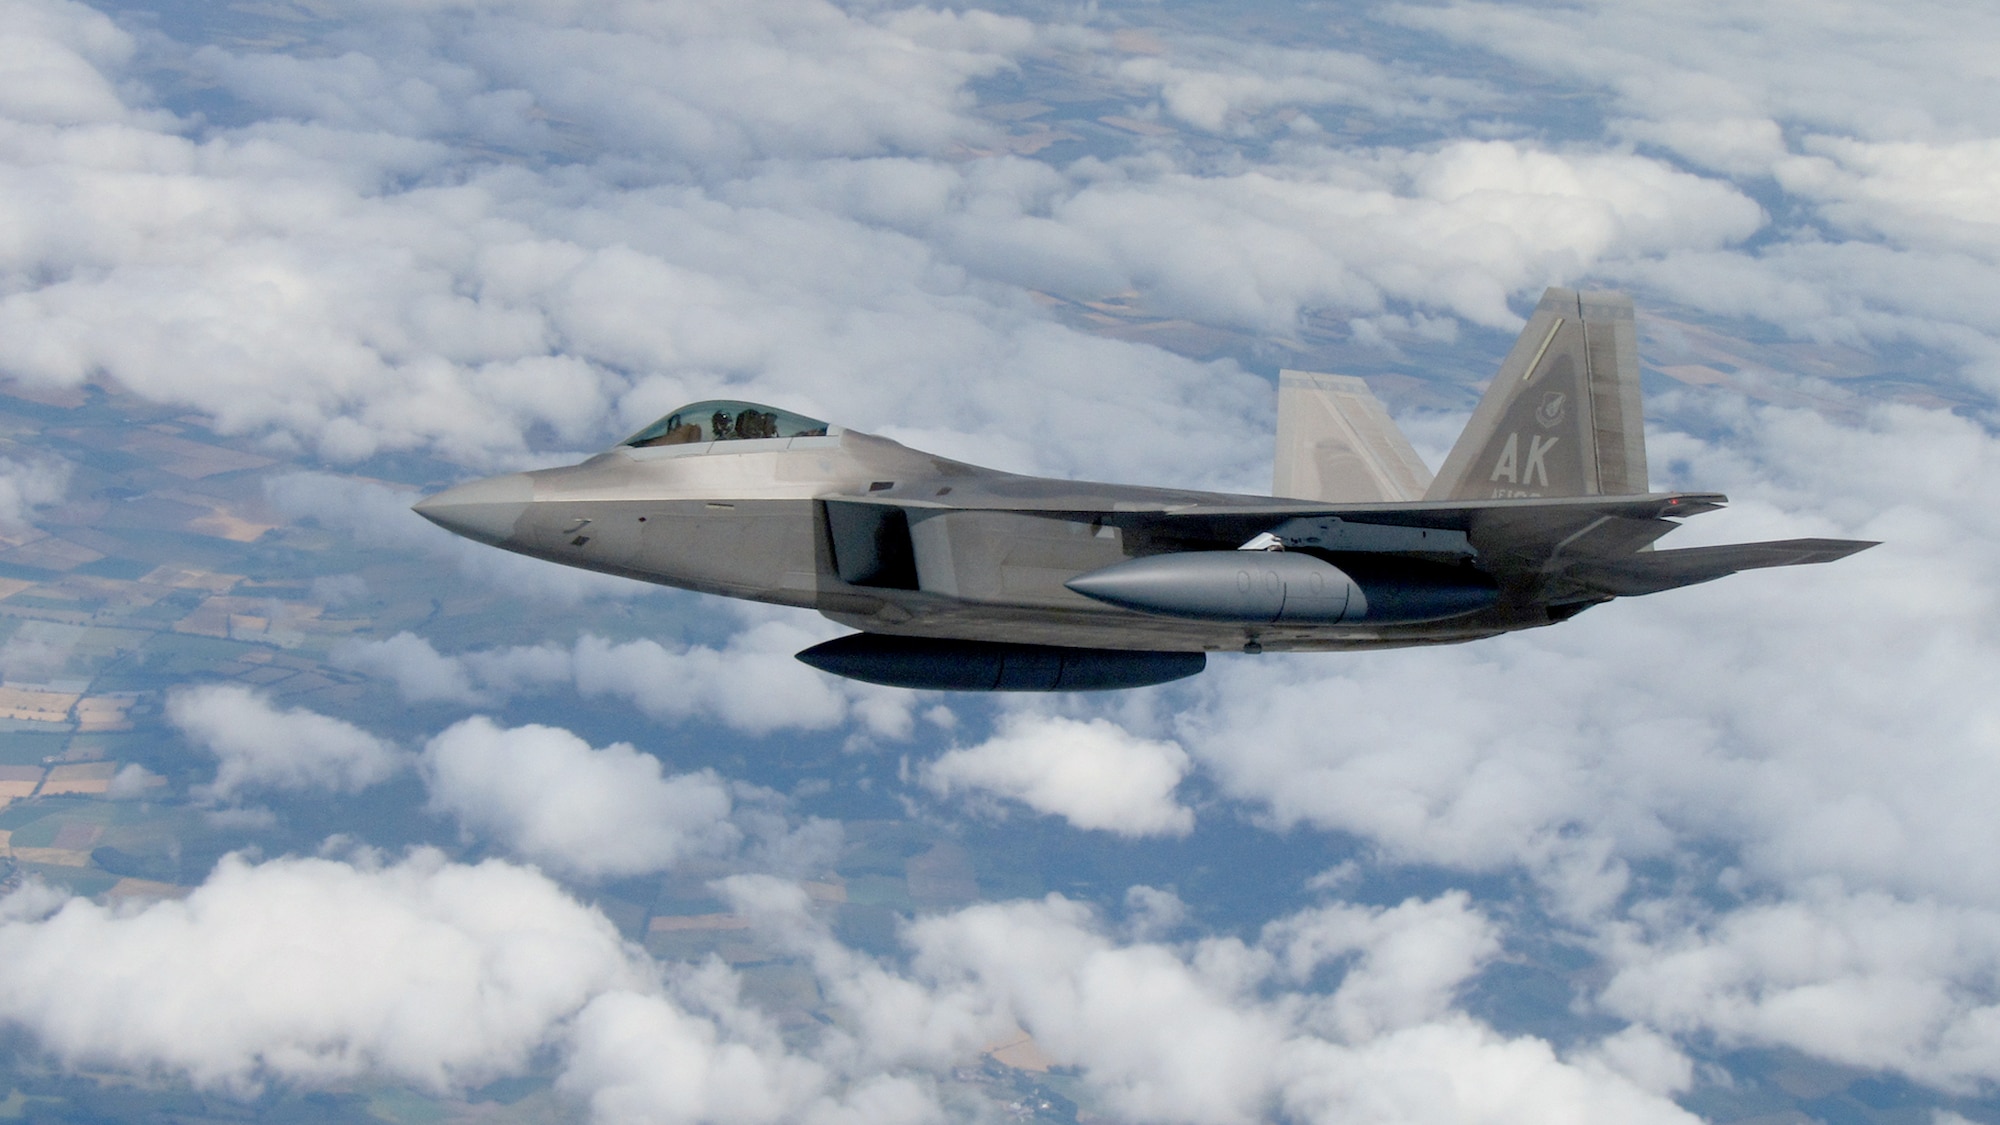 An F-22 Raptor from Elmendorf Air Force Base, Alaska, hangs off the wing of a KC-135 en route to the United States July 27, 2010. By sticking close to the tanker, the fighter could regularly top off its fuel tanks to ensure it had enough fuel to reach safety in the event it had to land unexpectedly. The tanker is assigned to the 100th Air Refueling Wing at Royal Air Force Mildenhall, England. (U.S. Air Force photo/Staff Sgt. Austin M. May)